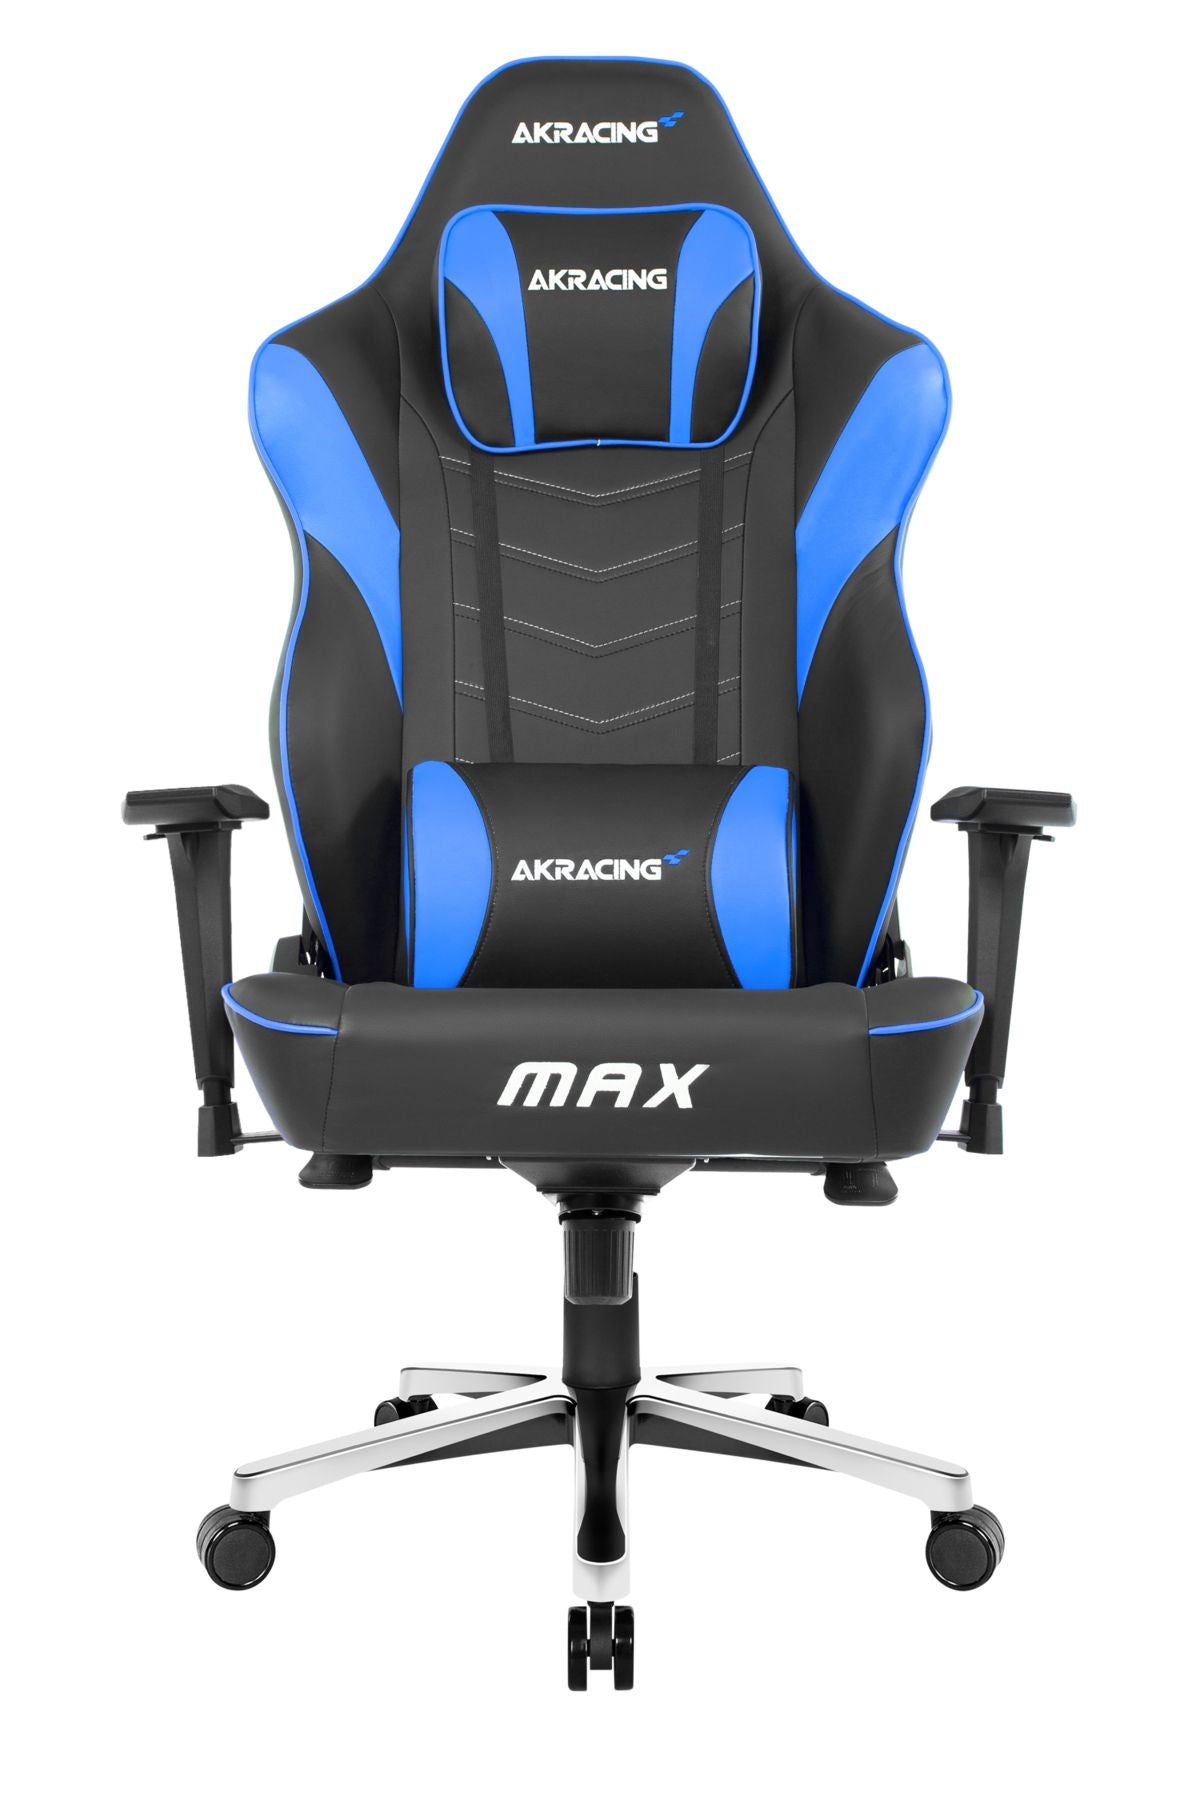 AKRacing Masters Series Max Gaming armchair Upholstered padded seat Black, Blue